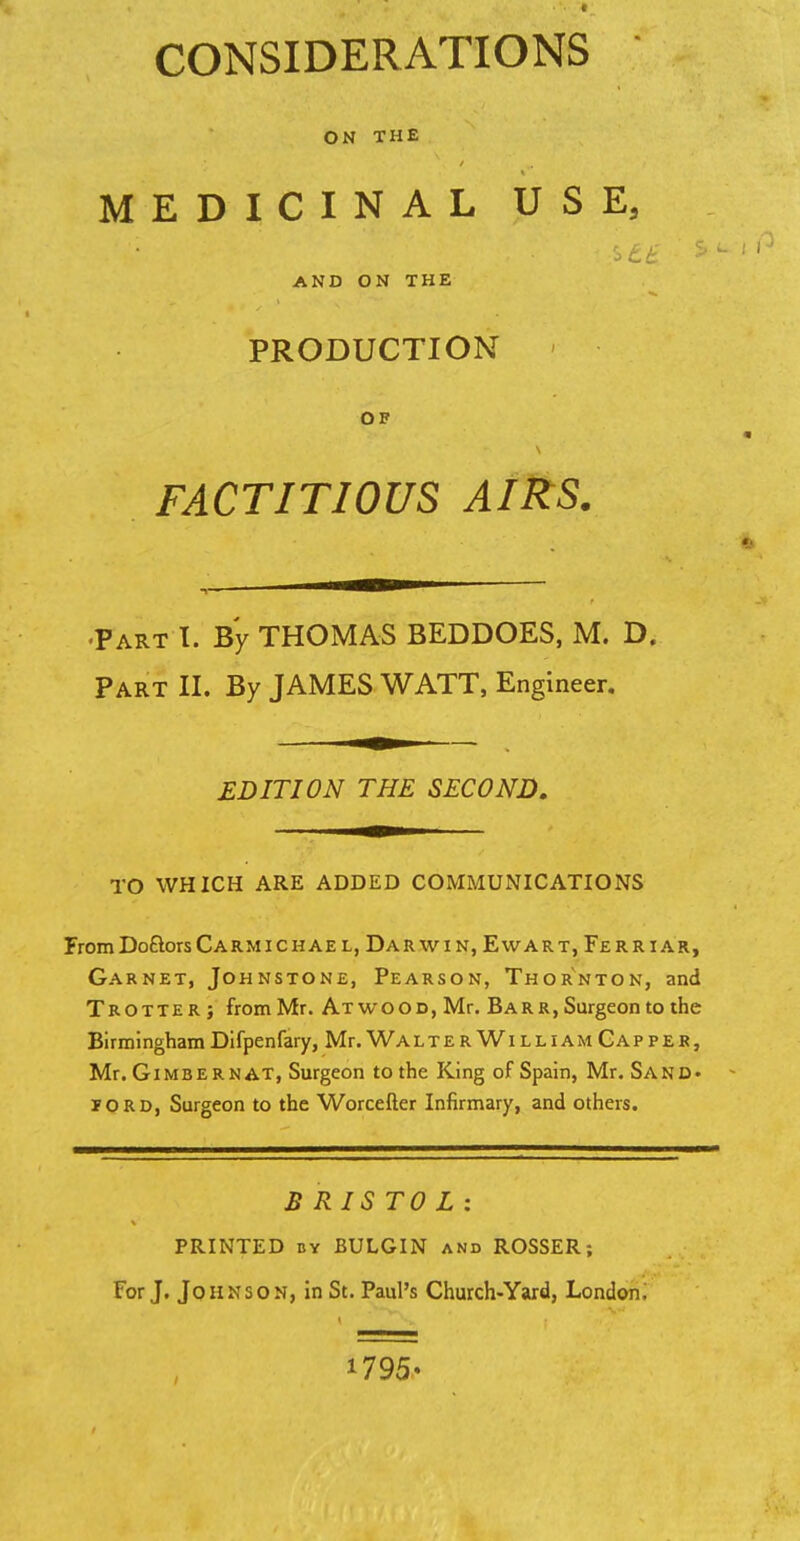 CONSIDERATIONS ON THE MEDICINAL USE, ■ AND ON THE PRODUCTION OF s FACTITIOUS AIRS. Part I. By THOMAS BEDDOES, M. D. Part II. By JAMES WATT, Engineer. EDITION THE SECOND. TO WHICH ARE ADDED COMMUNICATIONS FromDoftorsCarmichae l, Darwin, Ewart, Ferriar, Garnet, Johnstone, Pearson, Thornton, and Trotter; from Mr. ATwooc,Mr. Barr, Surgeon to the BirminghamDifpenfary, Mr. WalterWilliam Capper, Mr. Gimbernat, Surgeon to the King of Spain, Mr. Sand, iord, Surgeon to the Worcefter Infirmary, and others. BRISTOL: PRINTED by BULGIN and ROSSER; For J. Johnson, in St. Paul's Church-Yard, London. 1795-